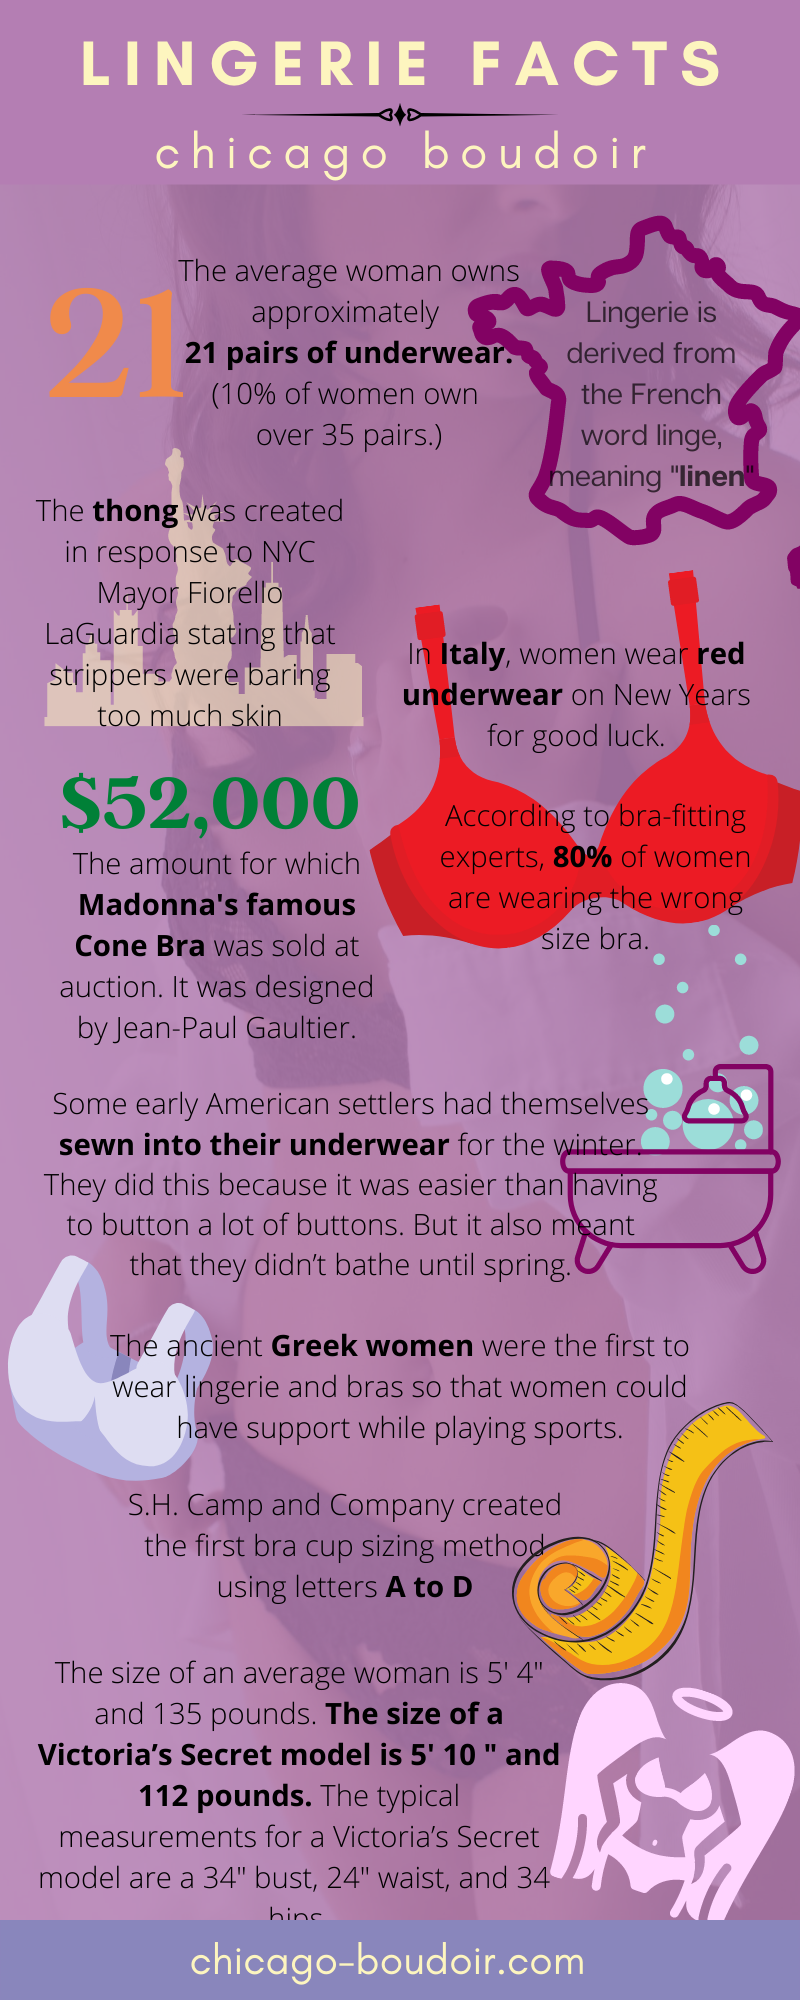 Why Are Bras So Expensive? (10 Reasons)